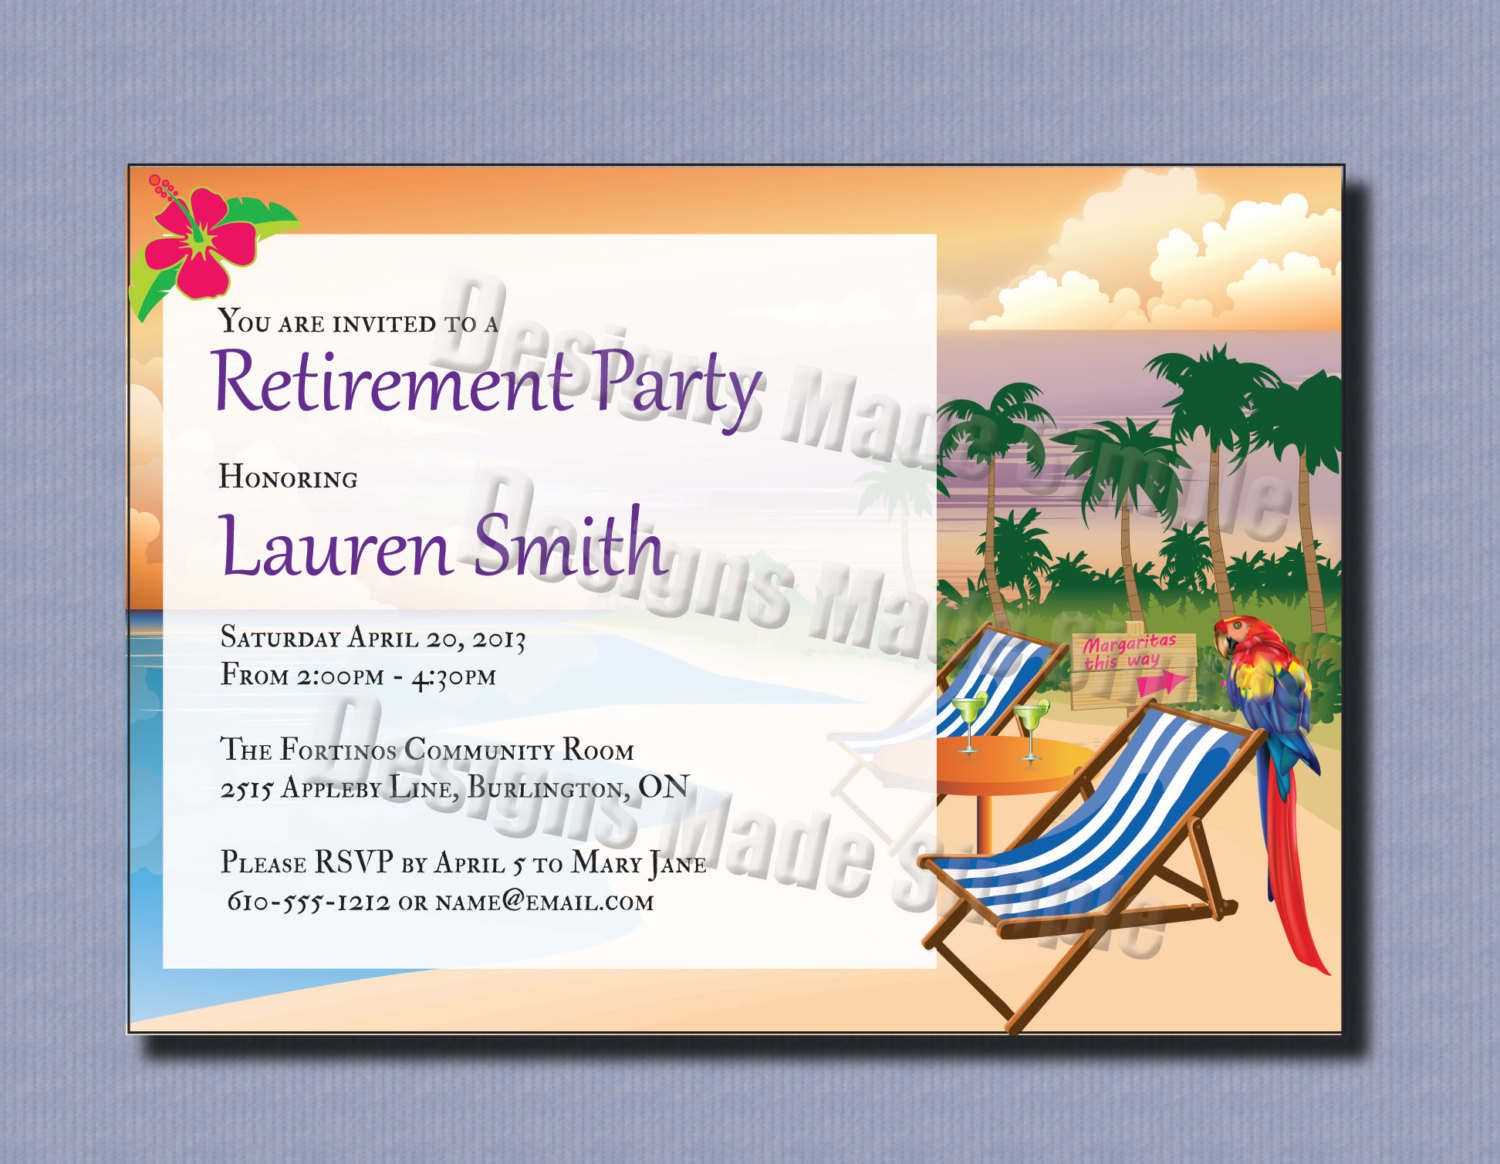 001 Retirement Invitation Template Free Shocking Ideas With Retirement Card Template